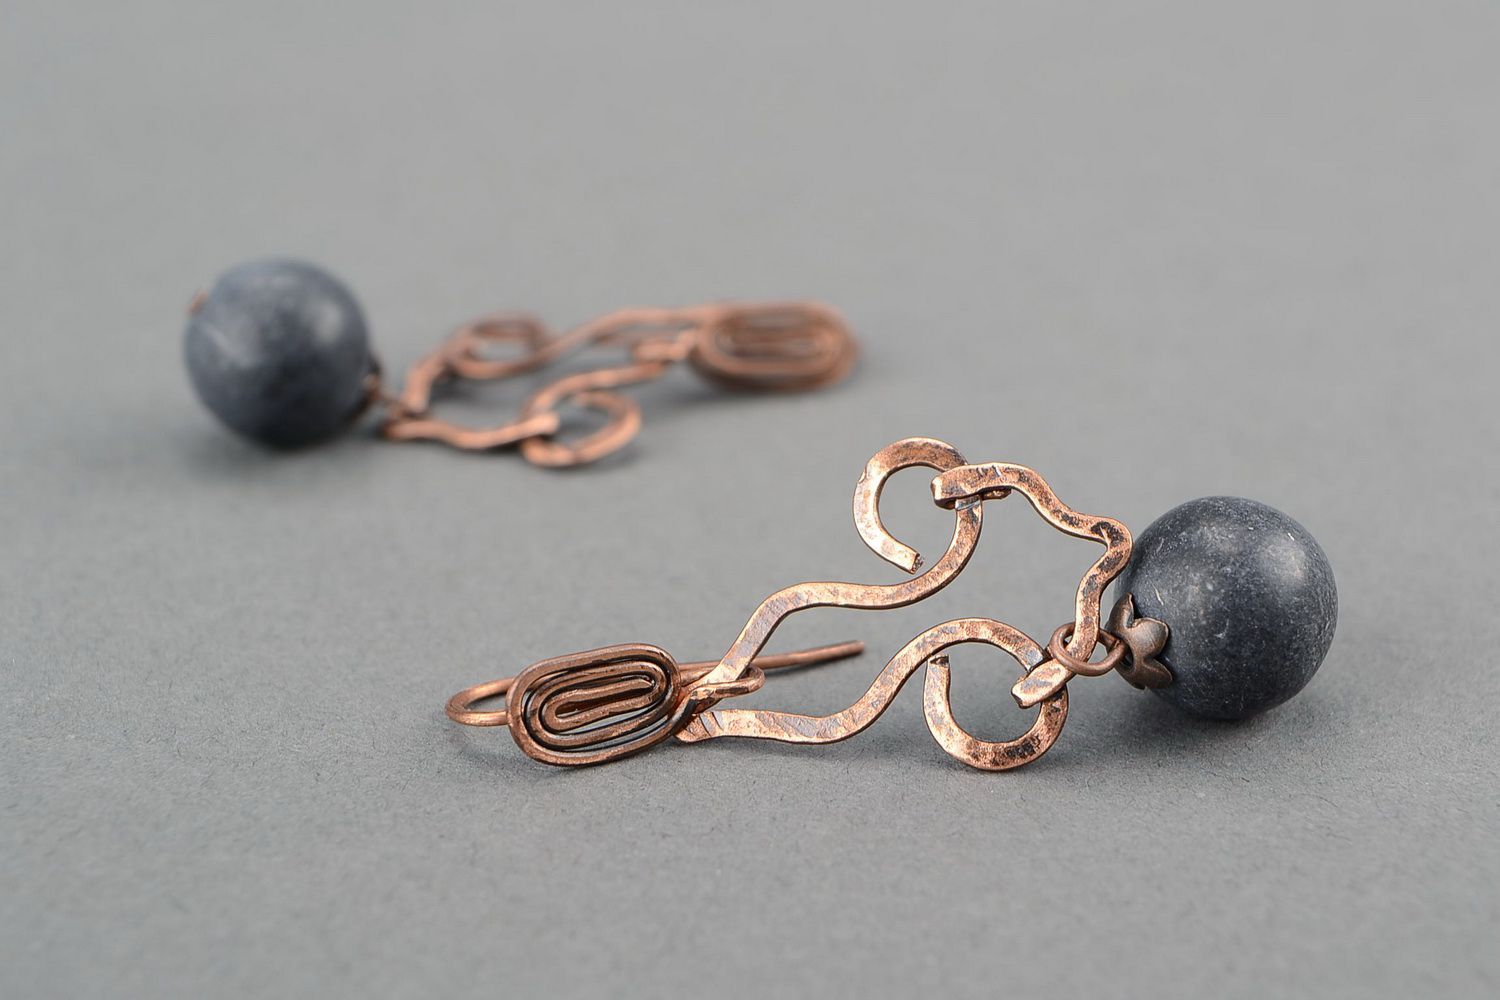 Earrings made of copper wire with schungite photo 2